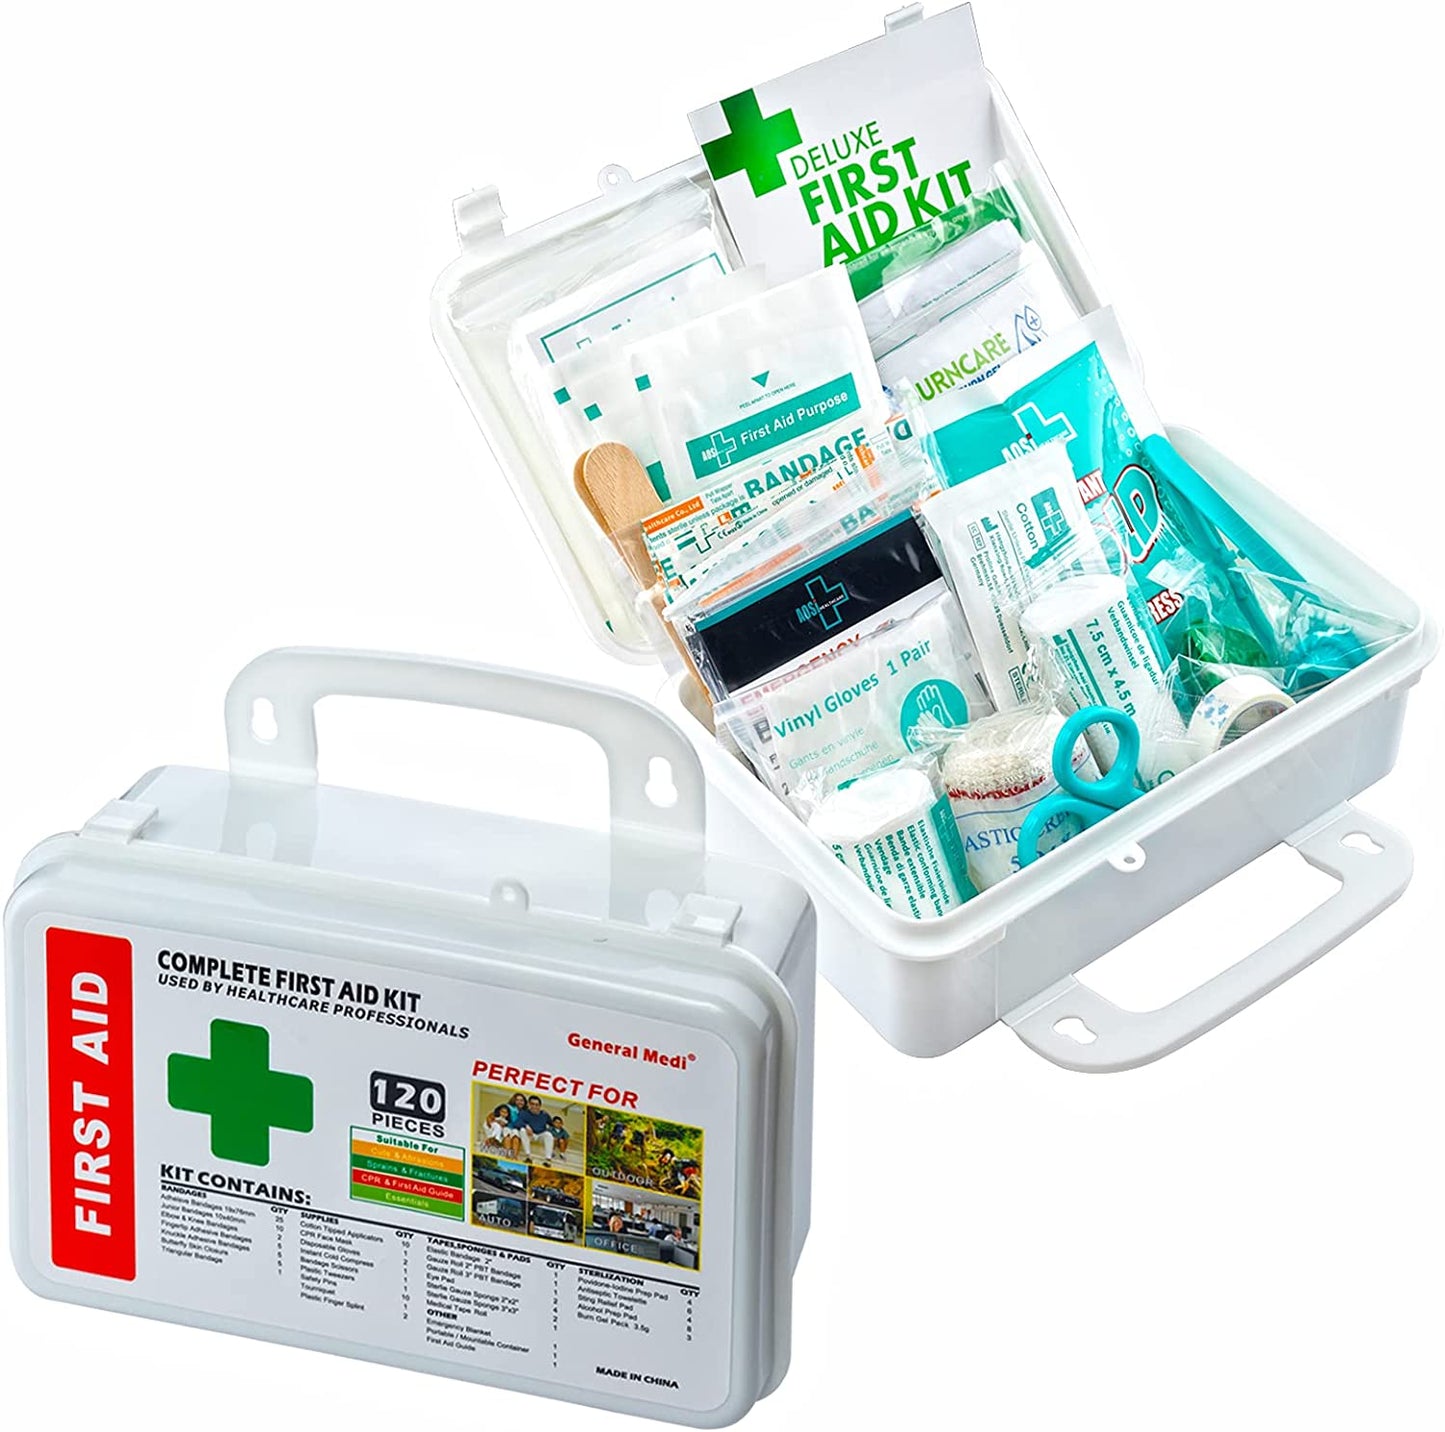 120 Pieces Hardcase First Aid Kit - Includes Instant Cold Pack, Emergency Blanket for Travel, Home, Office, Vehicle, Camping, Workplace & Outdoor